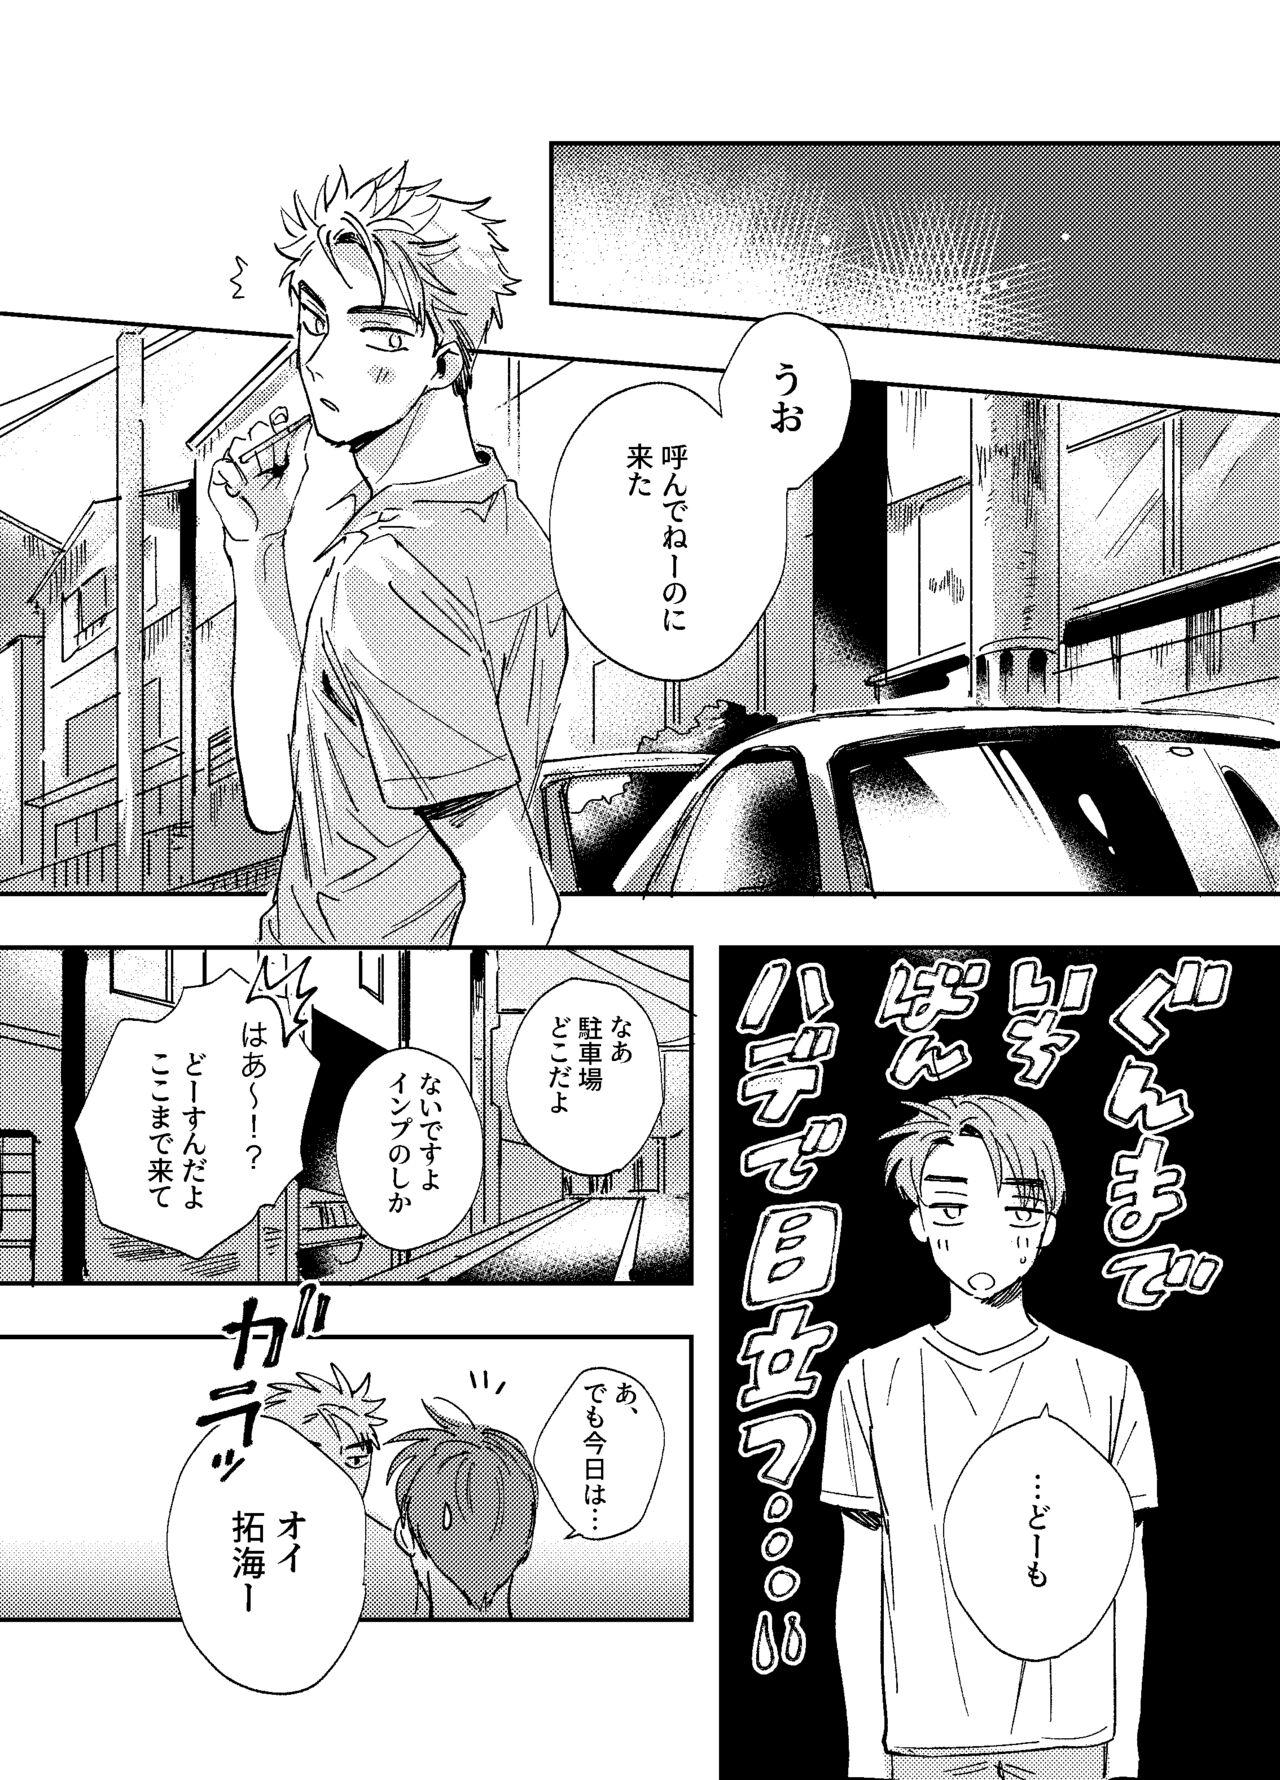 Spank more than stars, more than you. - Initial d Teen Blowjob - Page 7